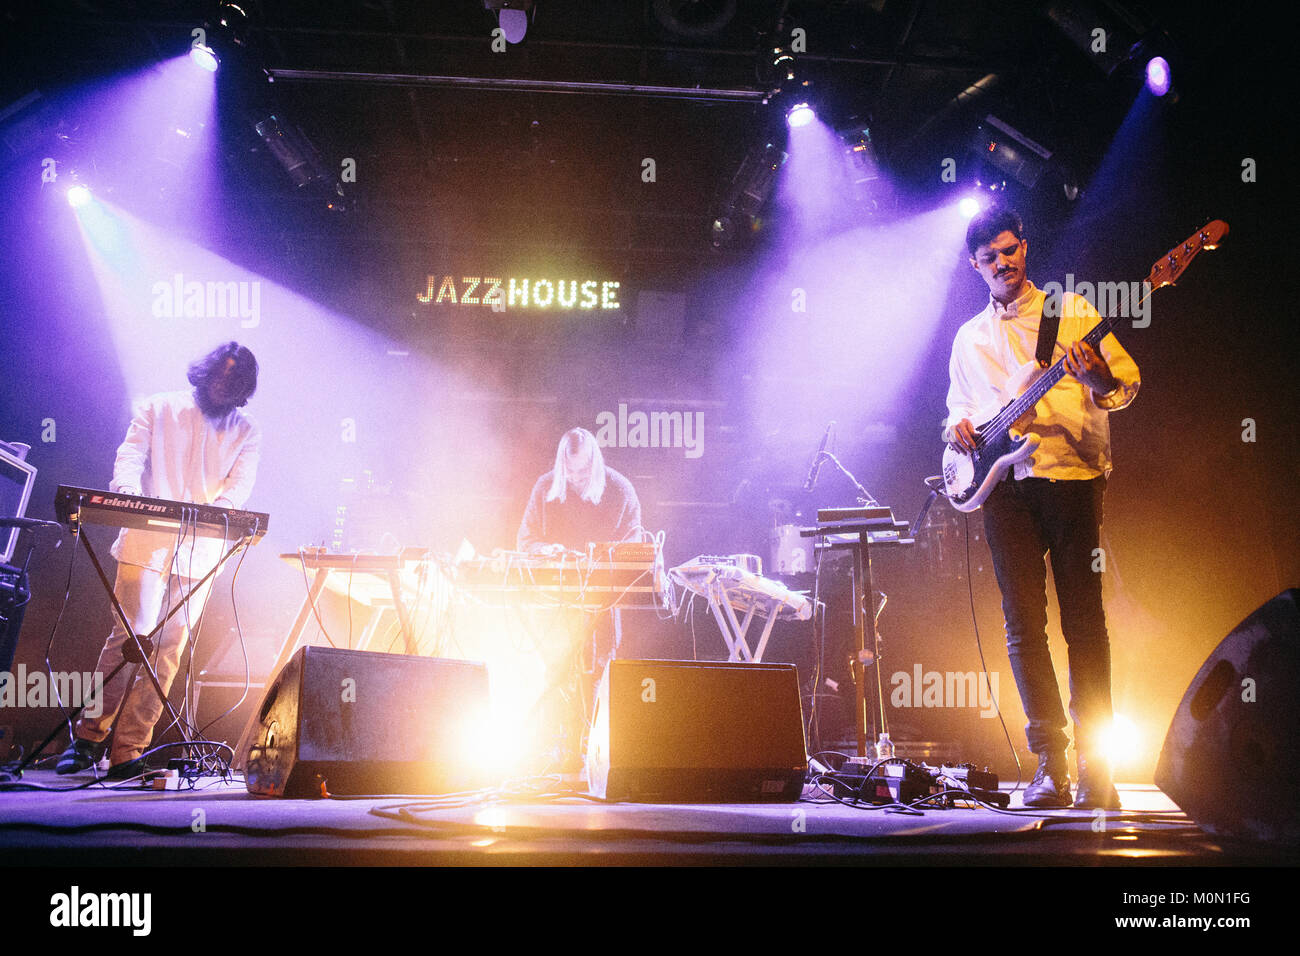 The Danish-Finnish musical group Liima performs a live concert at Jazzhourse Copenhagen. The band consists of the three Efterklang members Mads Brauer, Casper Clausen and Rasmus Stolberg and the Finnish percussionist Tatu Rönkö. Denmark, 26/03 2015. Stock Photo